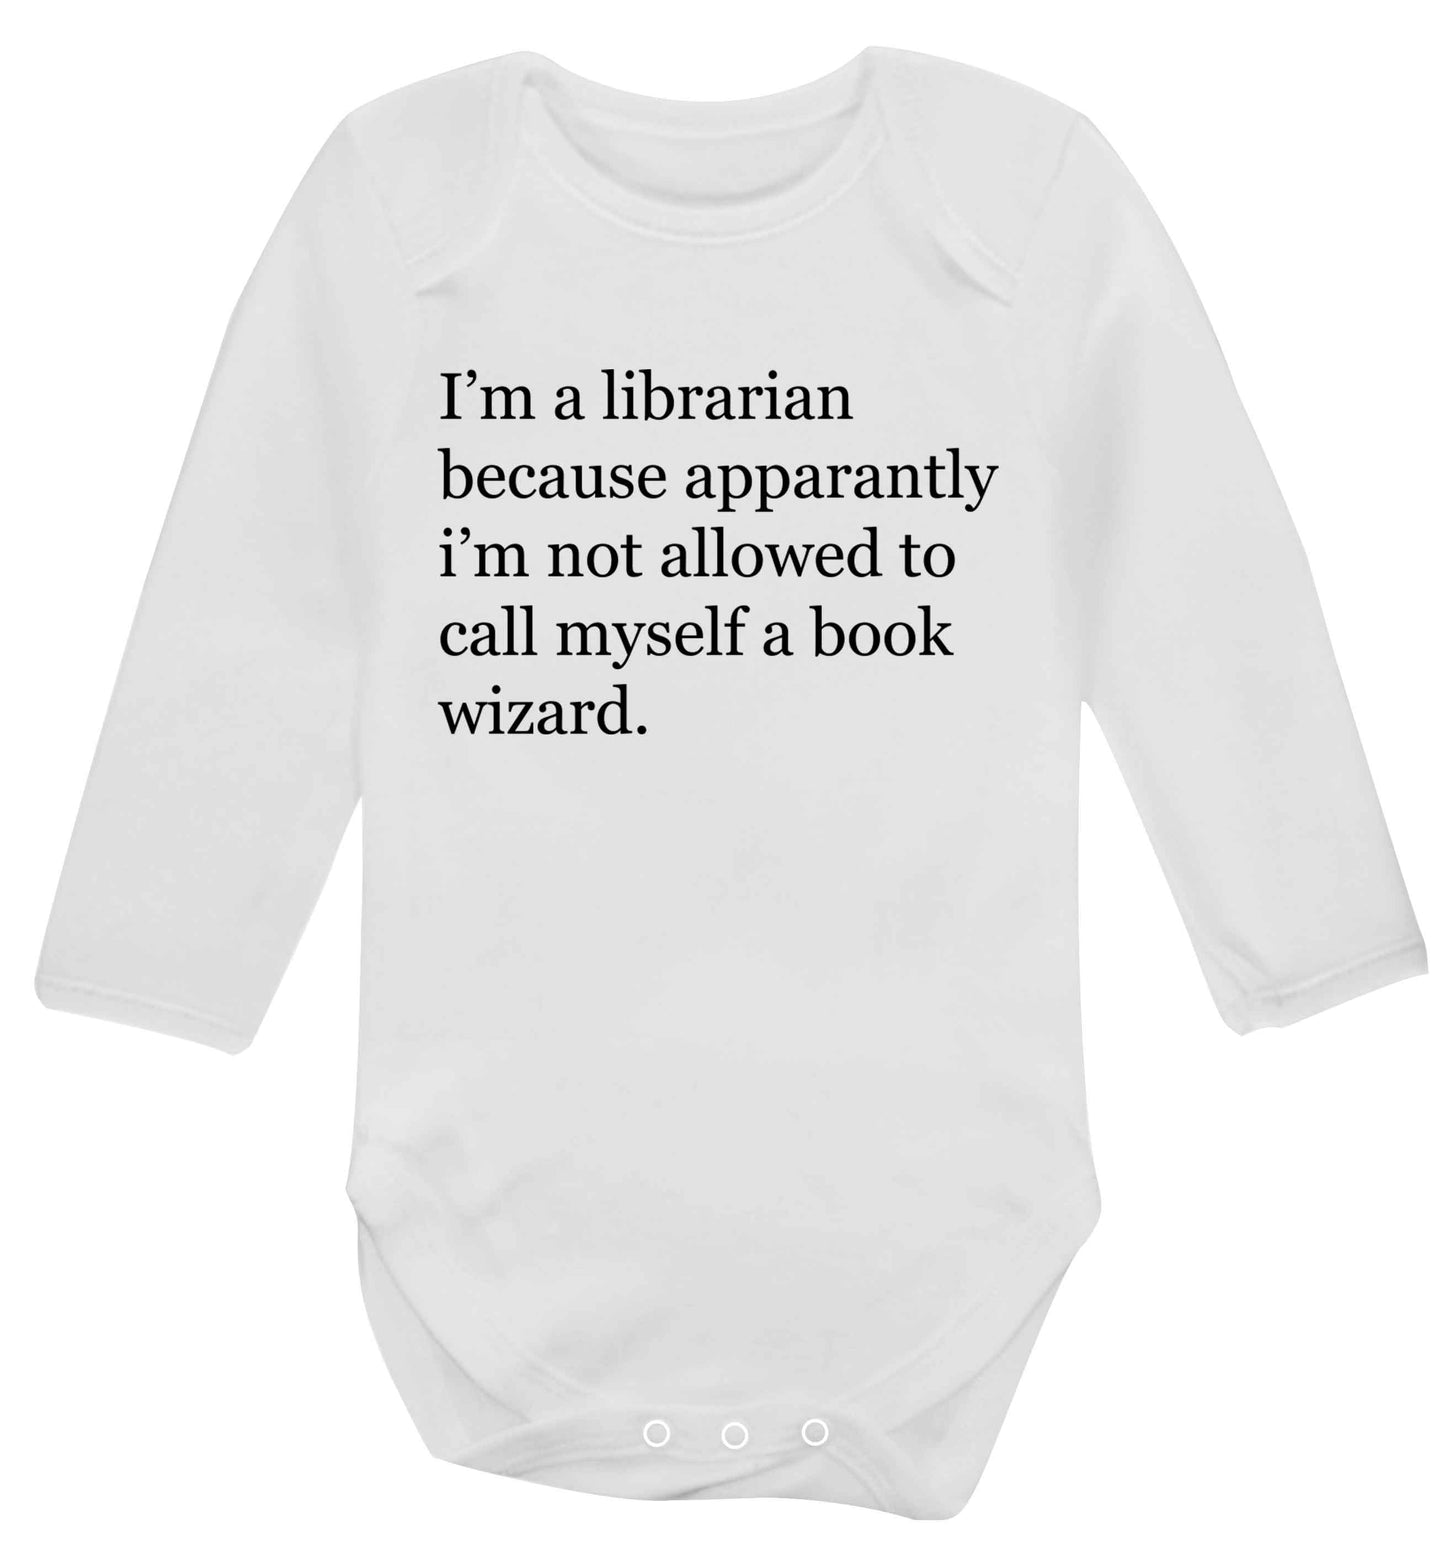 i√ïm a librarian because apparantly i√ïm not allowed to call myself a book wizard Baby Vest long sleeved white 6-12 months